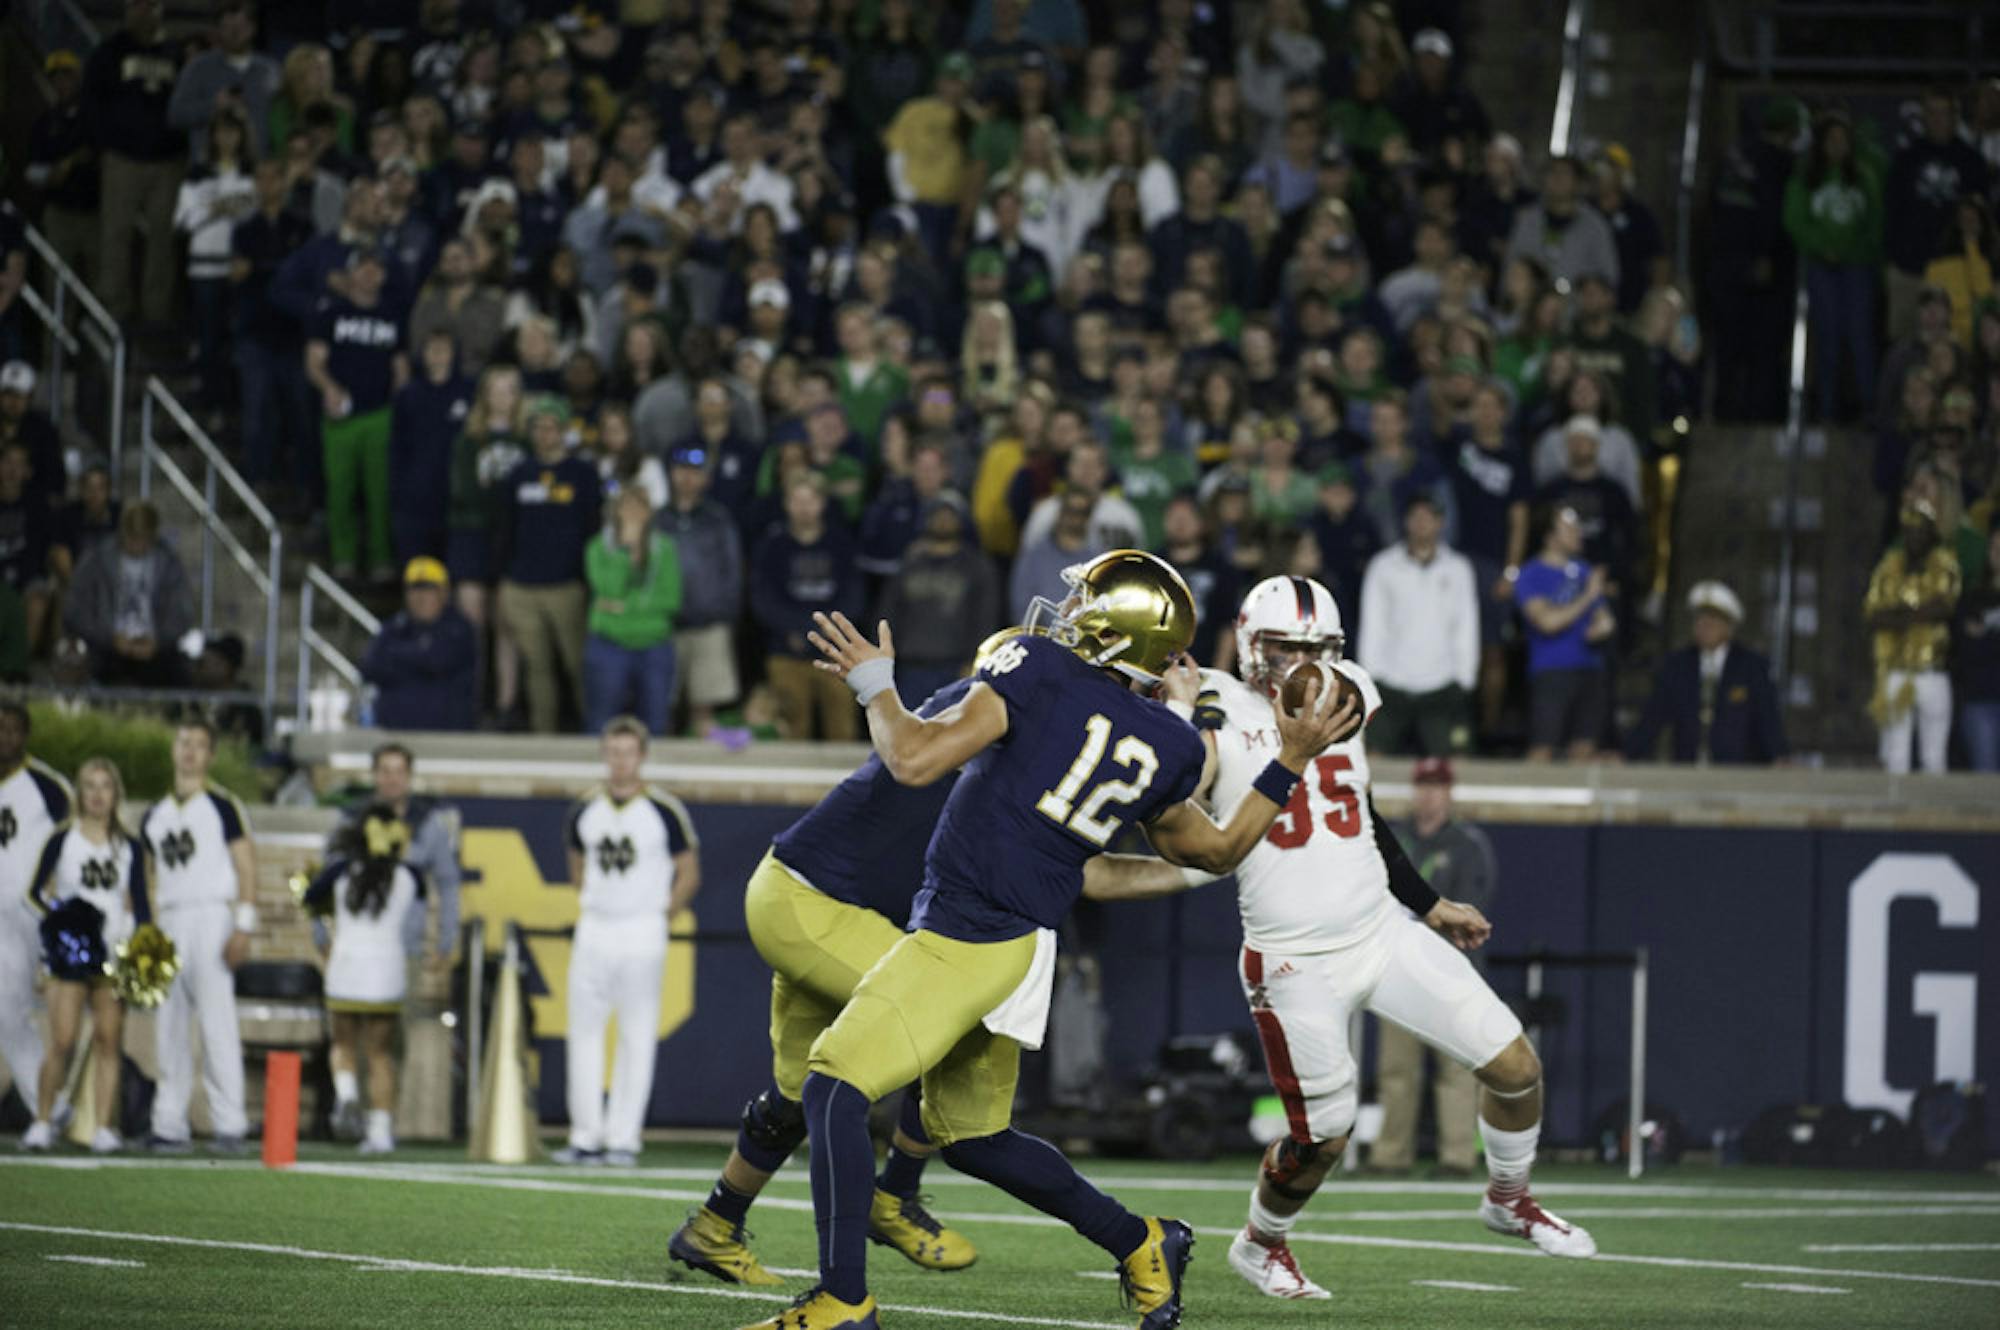 Irish sophomore quarterback Ian Book fires a pass during Notre Dame's 52-17 win over Miami (OH) on Saturday at Notre Dame Stadium.